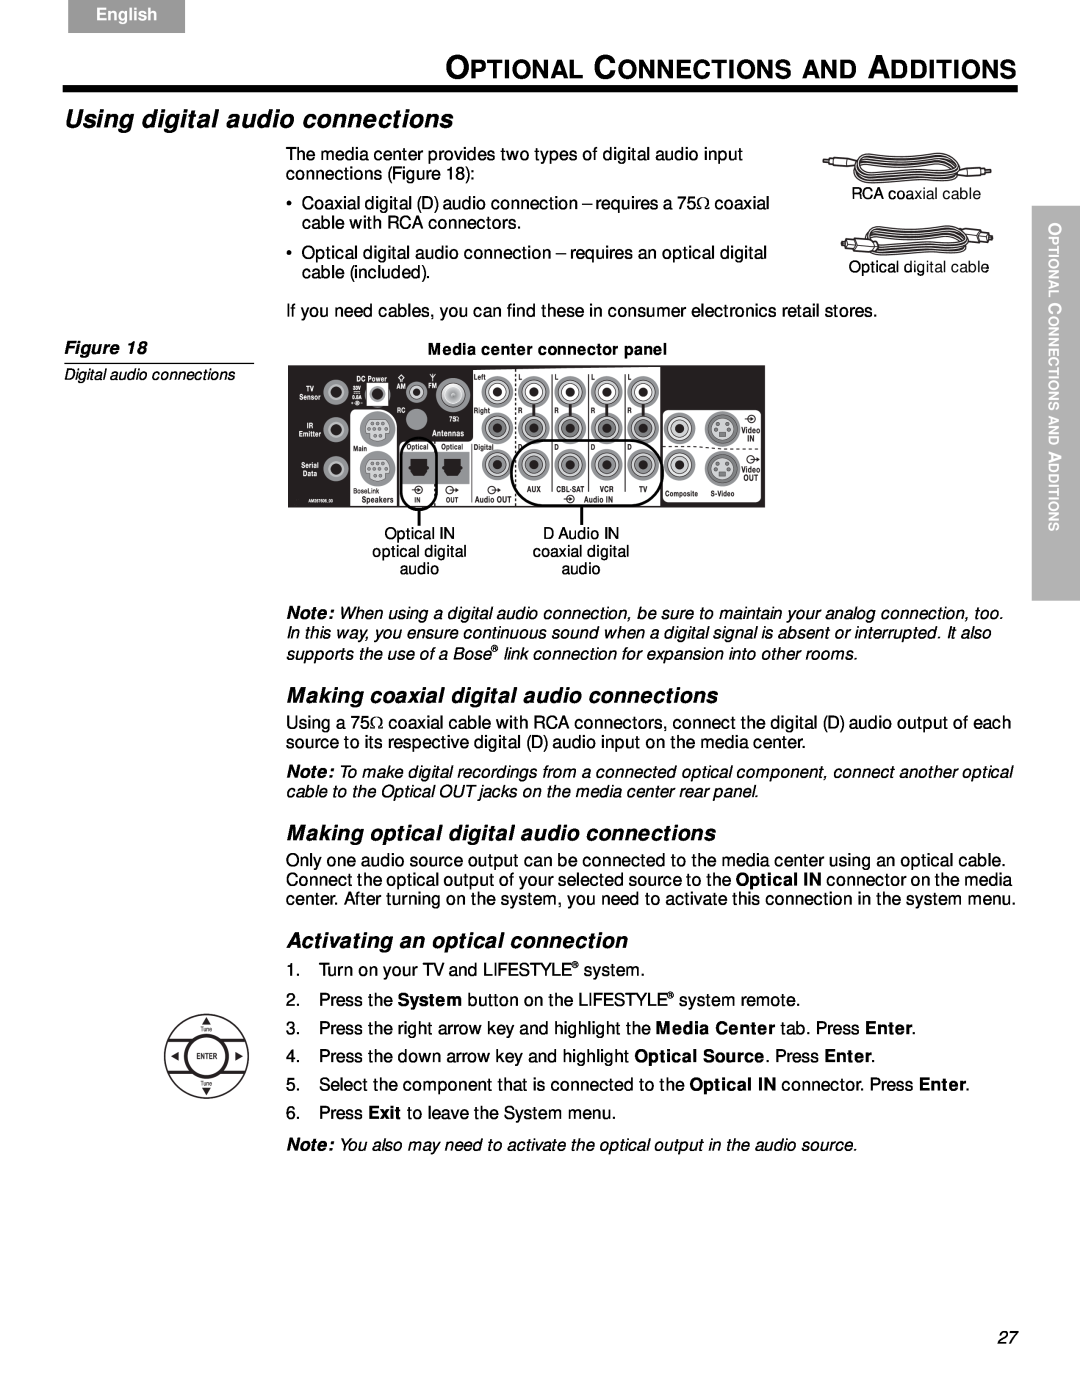 Bose VS-2 Optional Connections And Additions, Using digital audio connections, Making coaxial digital audio connections 